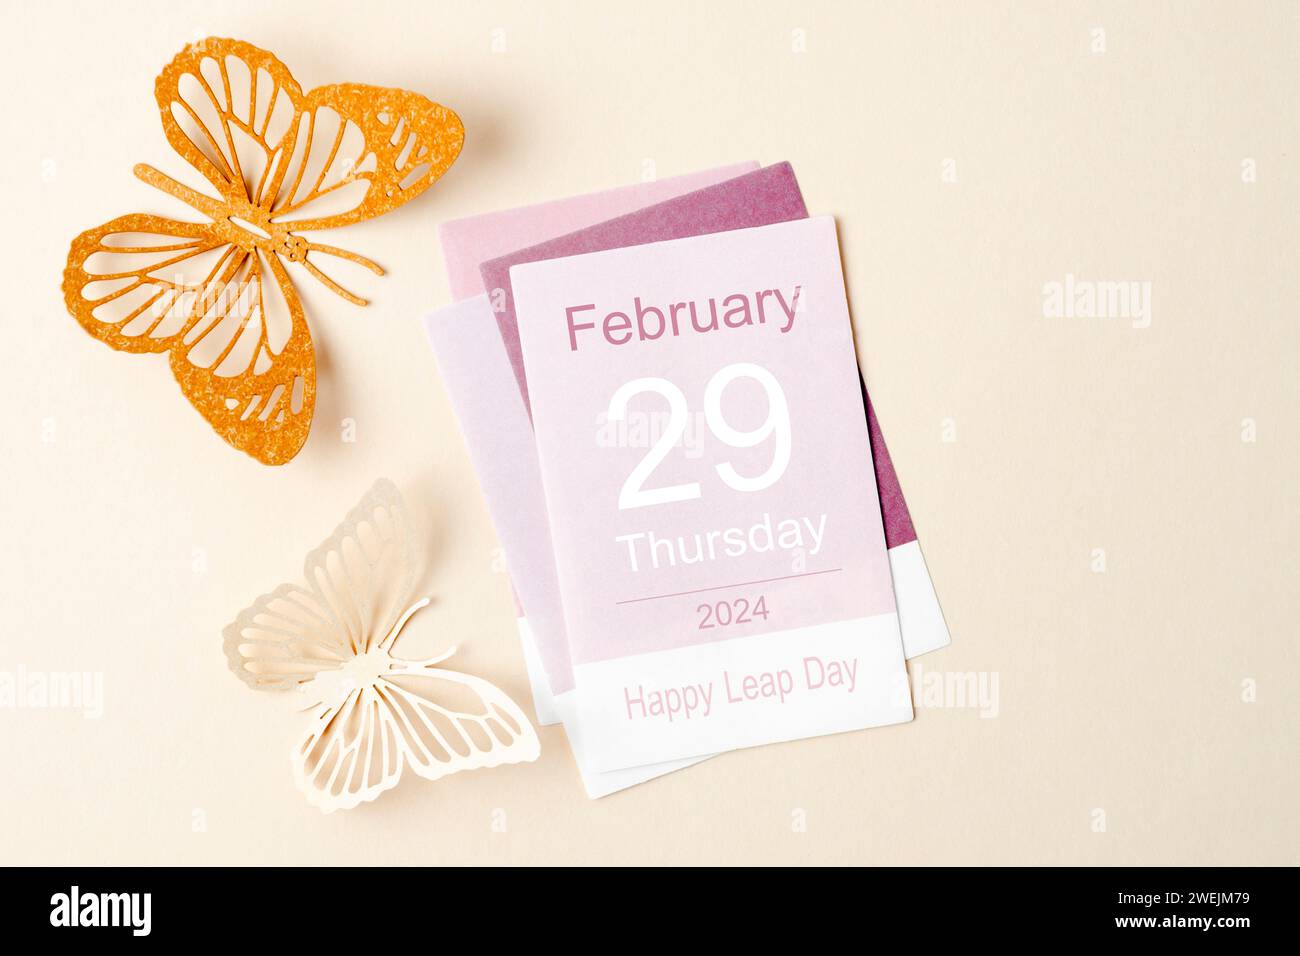 Happy Leap day or leap year slogan. Calendar page 29 February, month 2024 or 2028 and 366 days. 29th Day of february. Stock Photo